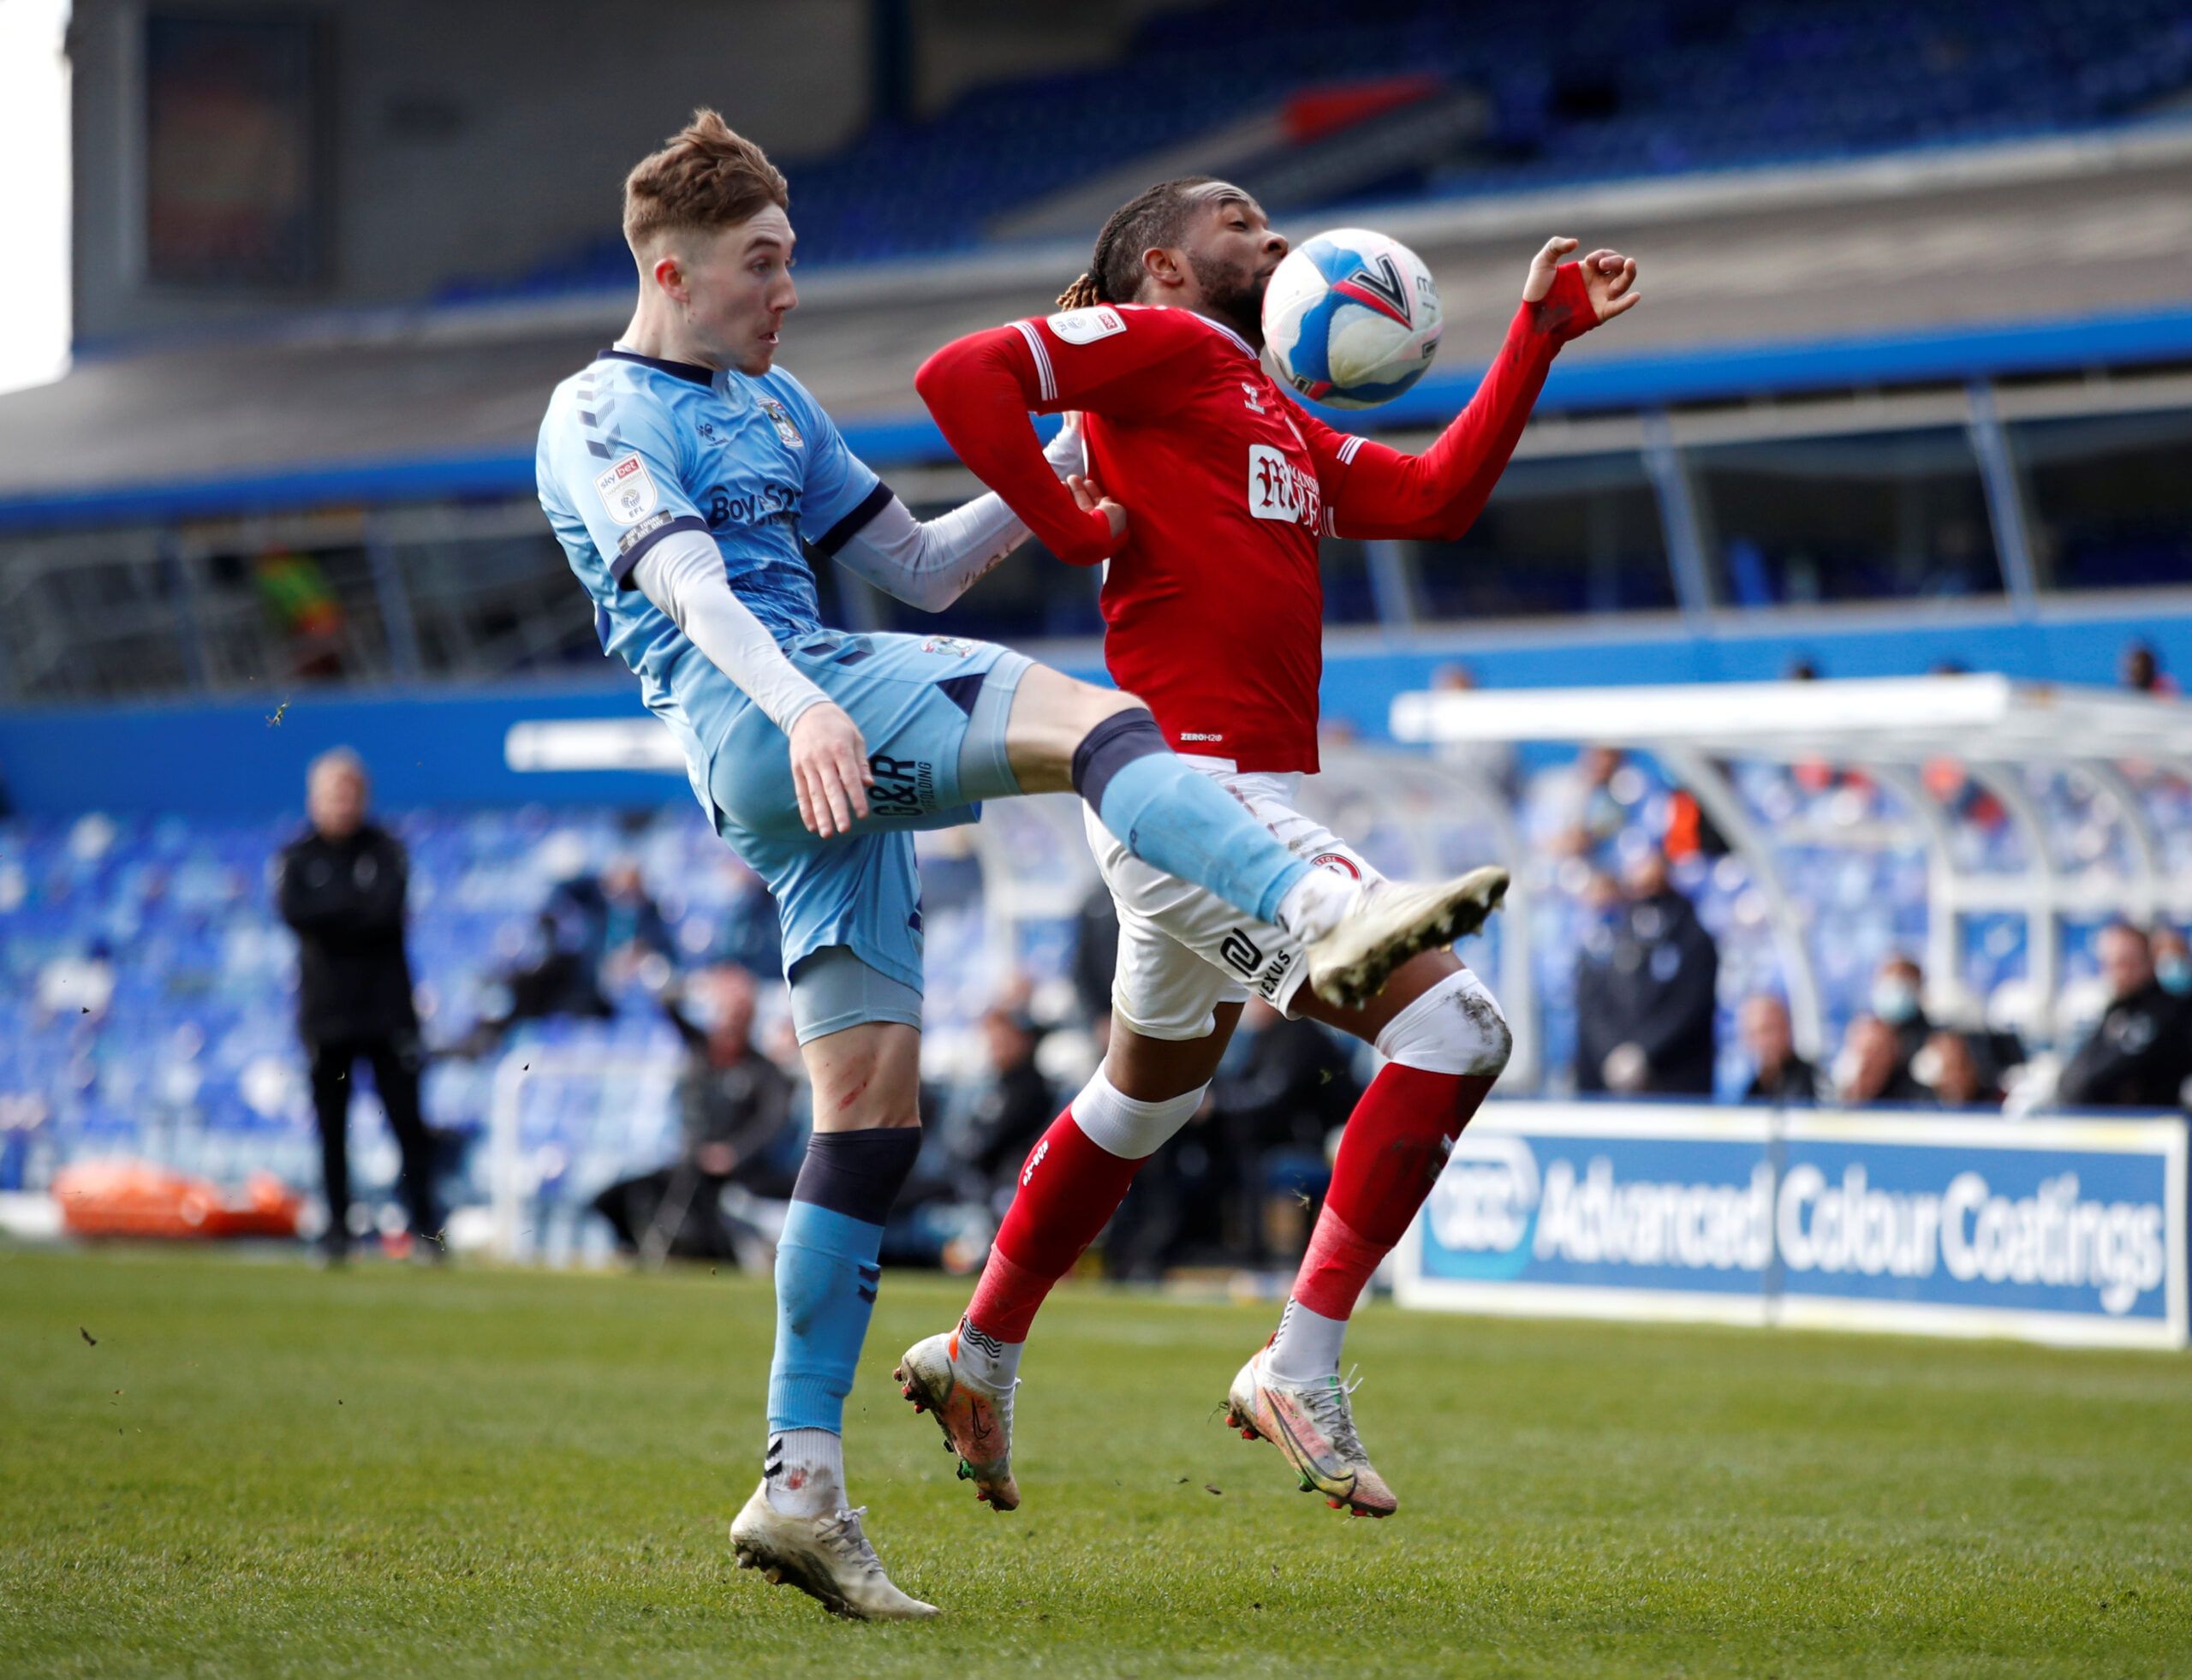 Soccer Football - Championship - Coventry City v Bristol City - St Andrew's, Birmingham, Britain - April 5, 2021  Coventry City's Josh Eccles in action with Bristol City's Kasey Palmer  Action Images/Andrew Boyers  EDITORIAL USE ONLY. No use with unauthorized audio, video, data, fixture lists, club/league logos or 